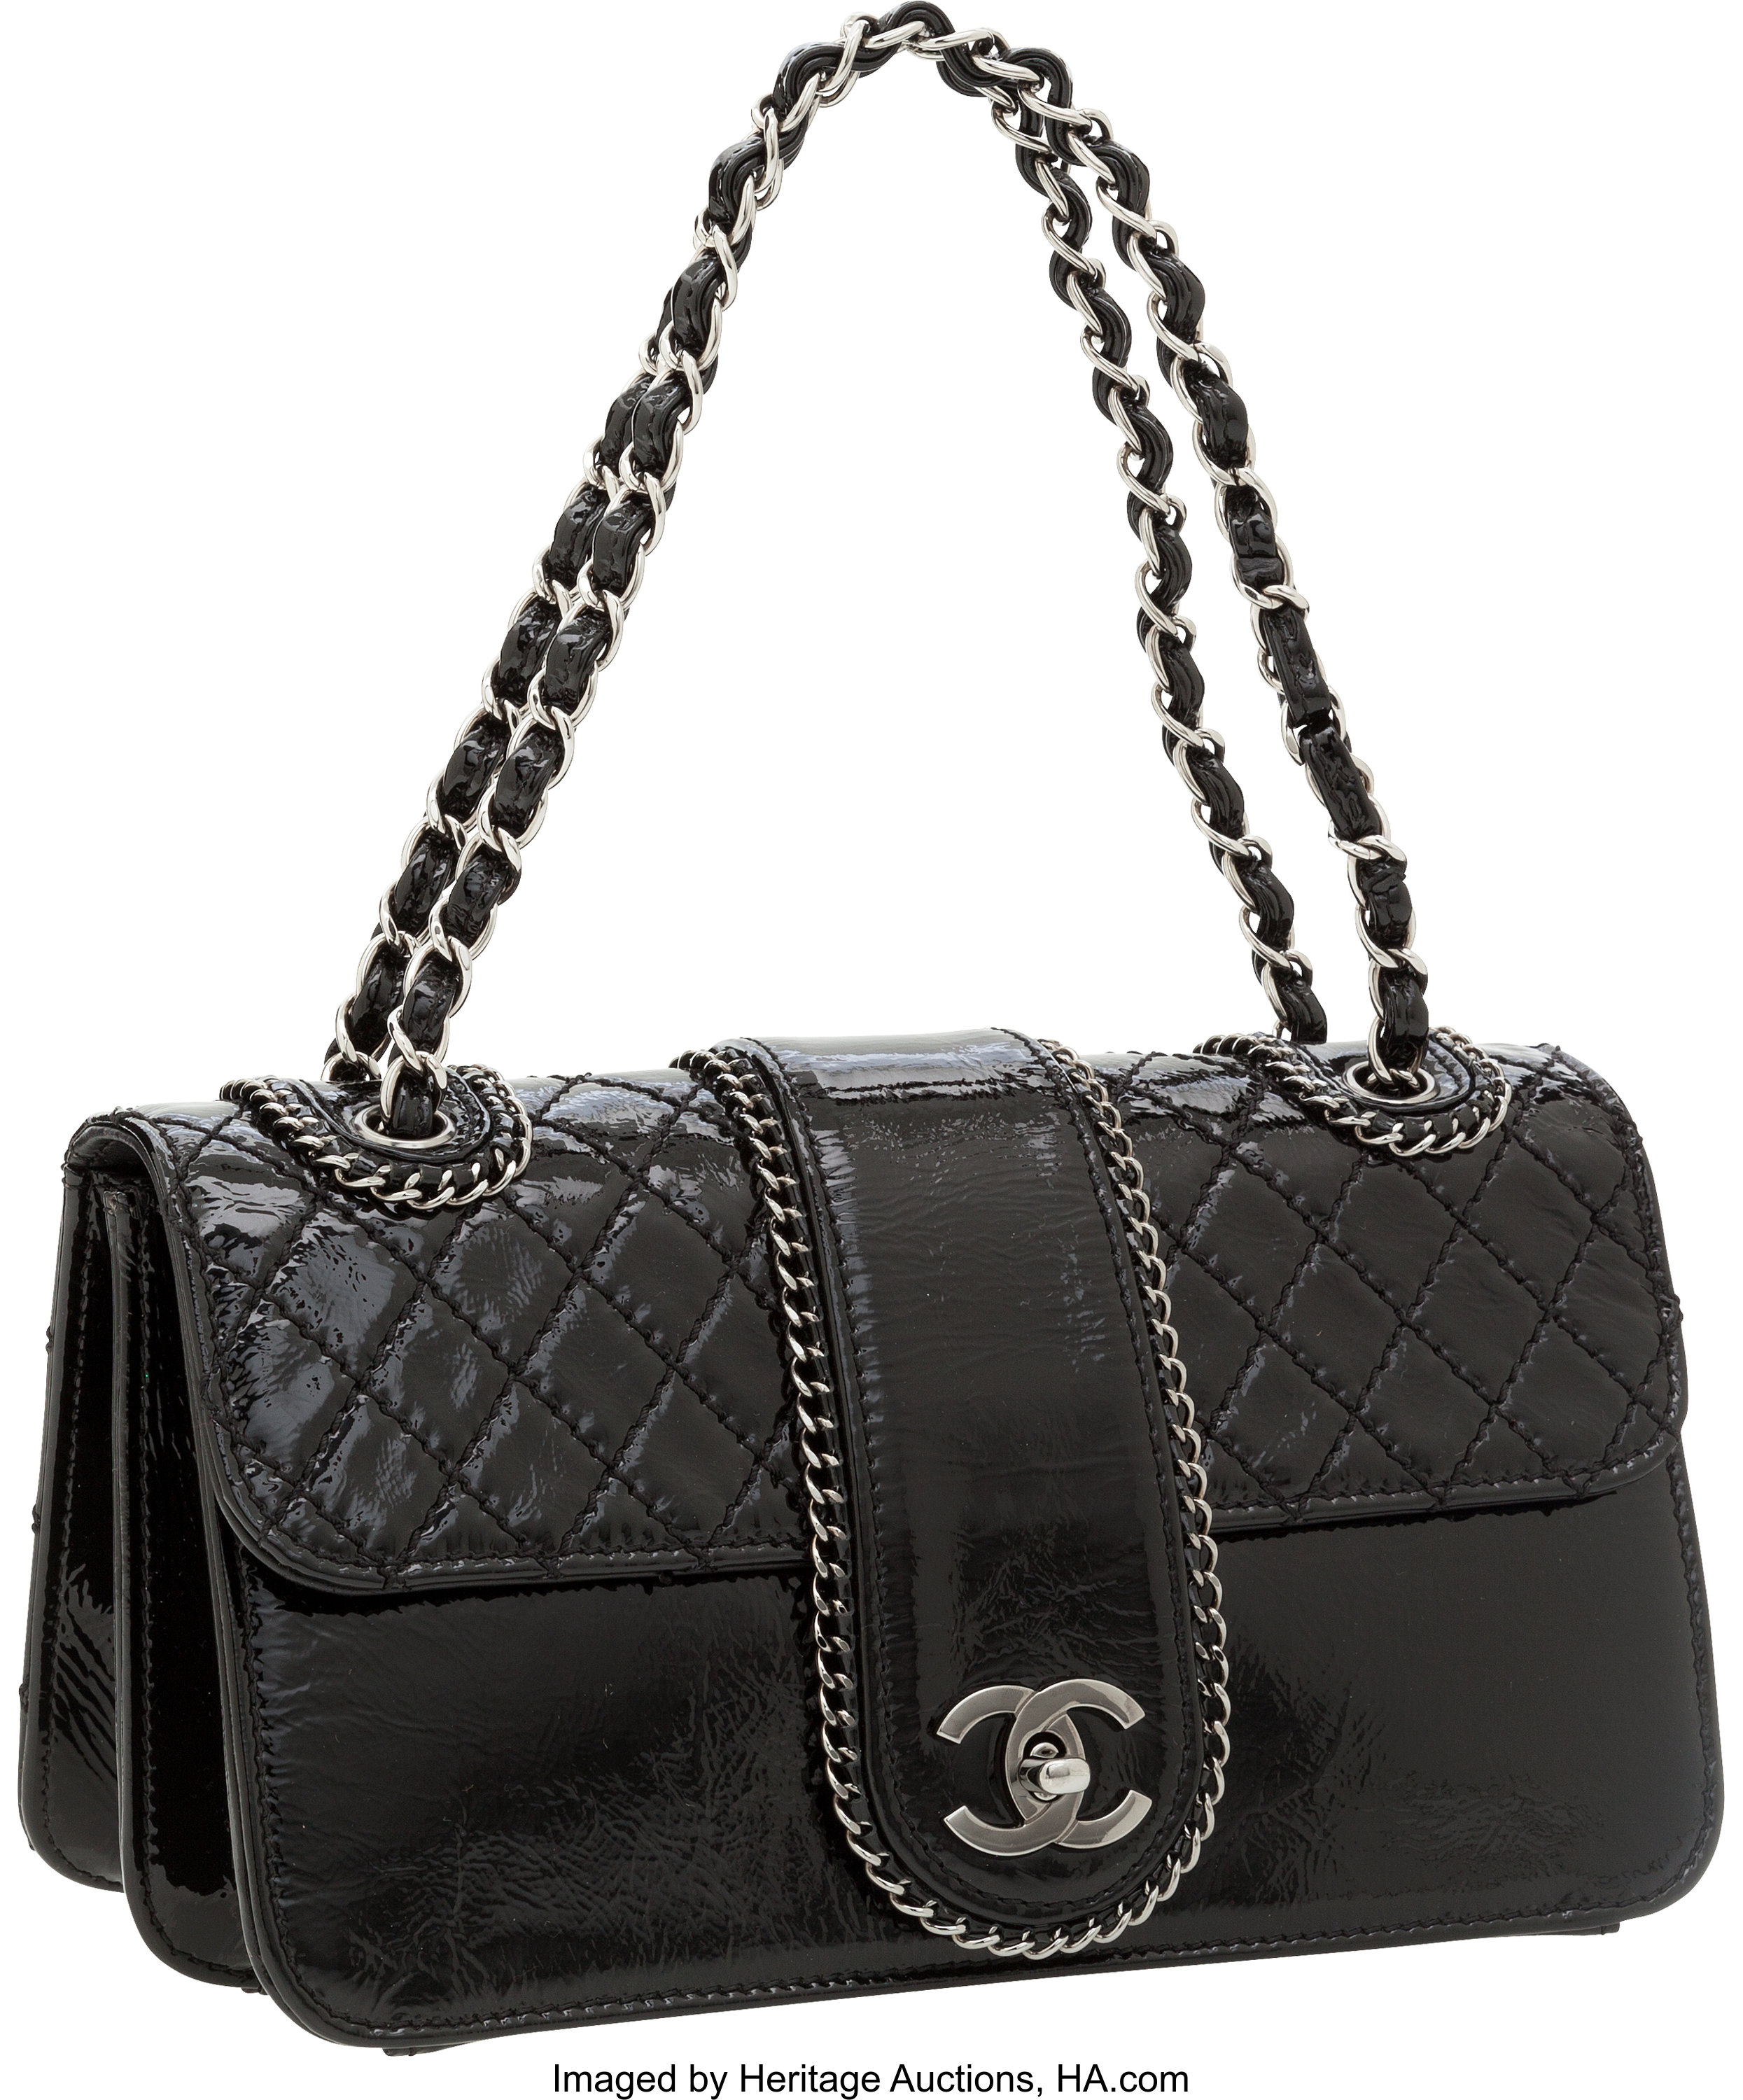 Chanel Black Quilted Patent Leather Madison Flap Bag with Gunmetal